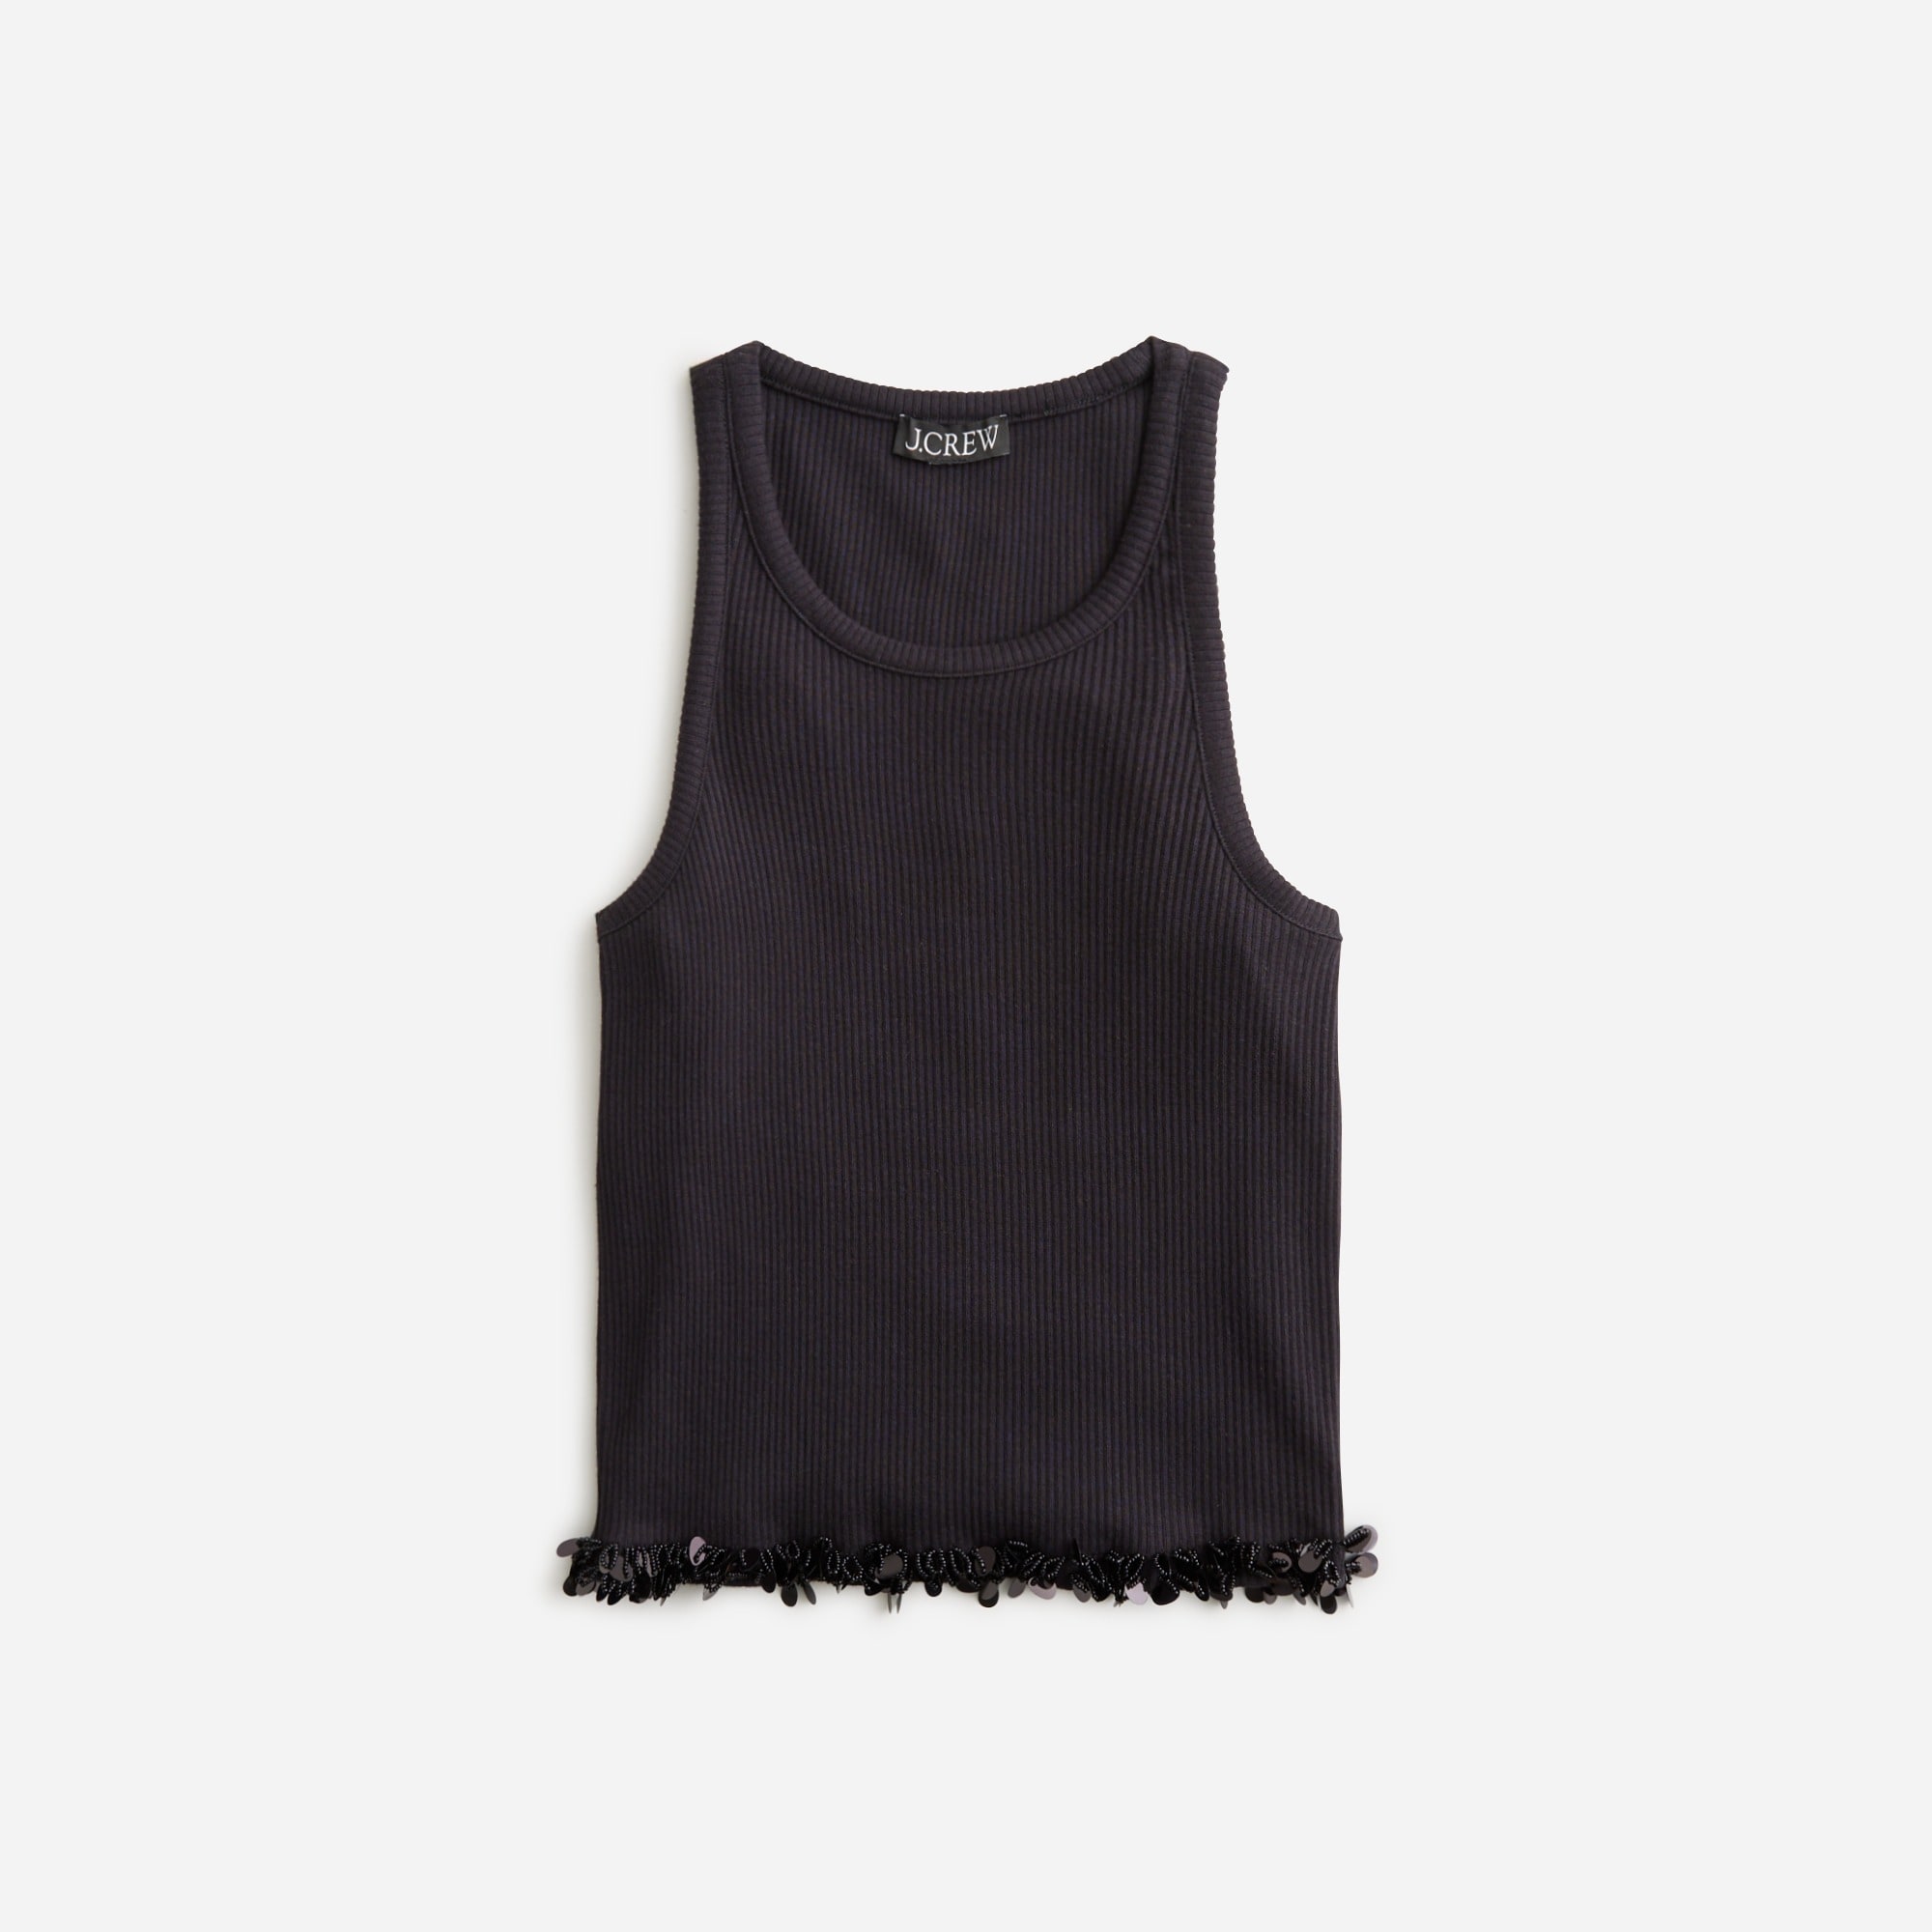  Cropped vintage rib cutaway tank top with sequins